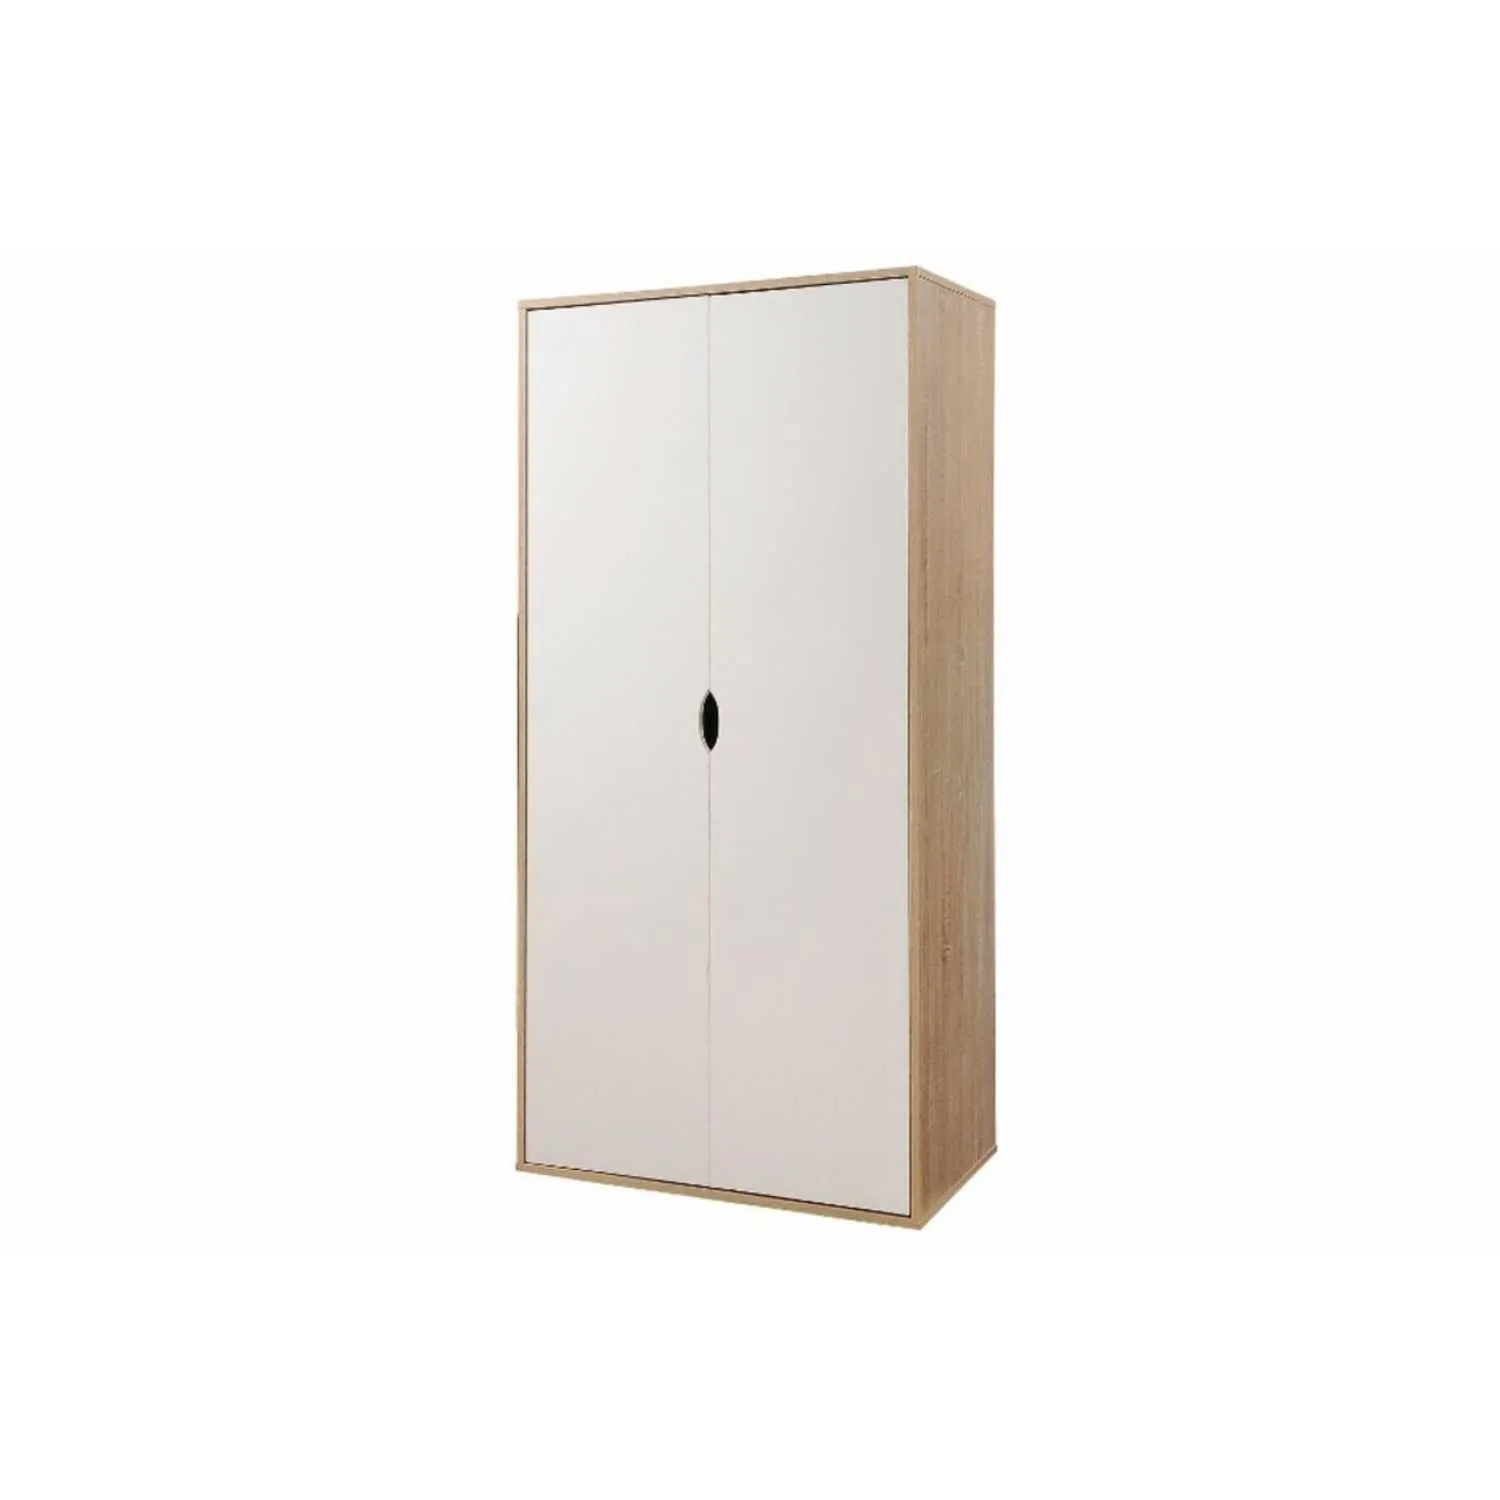 Modern Oak and White 2 Door Double Wardrobe with Cut Out Handles 165 x 79cm